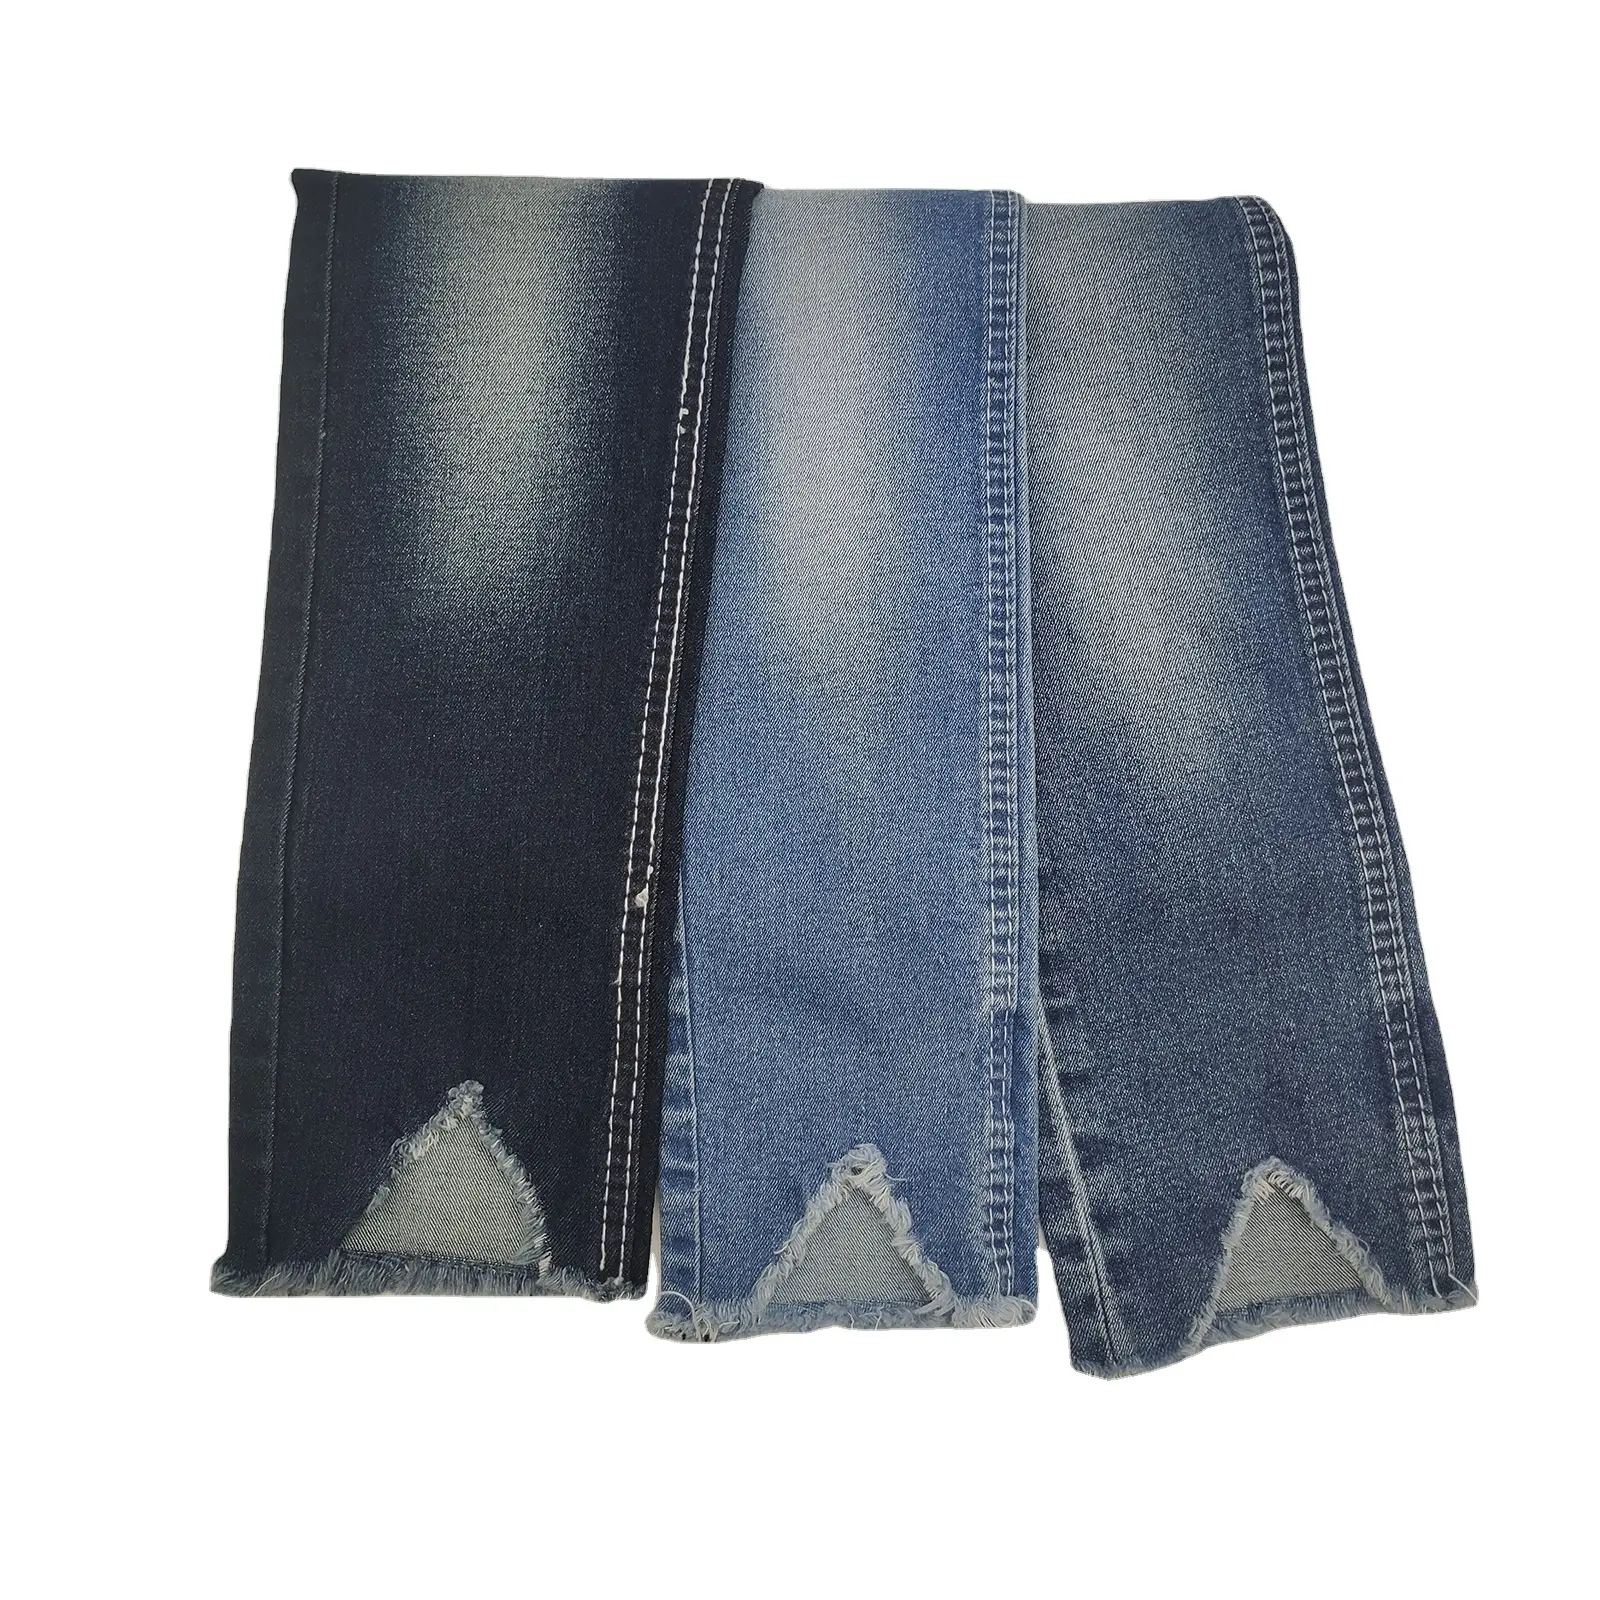 Low Price stetrch twill cotton polyester spandex denim fabric for man jeans